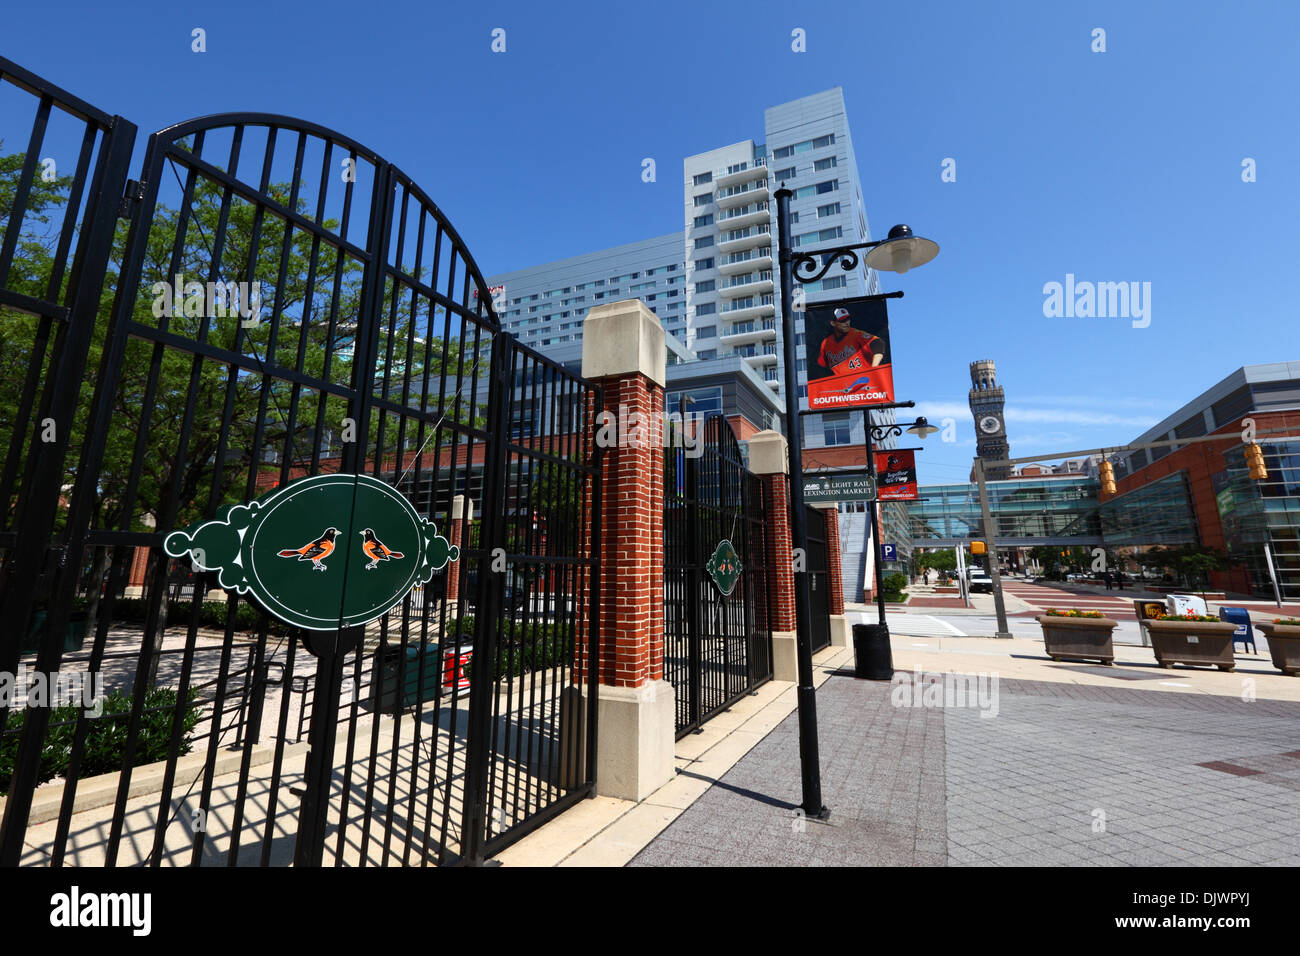 Entrance to Oriole Park (home of Baltimore Orioles), Hilton Hotel and Bromo Seltzer tower in background, Baltimore, USA Stock Photo